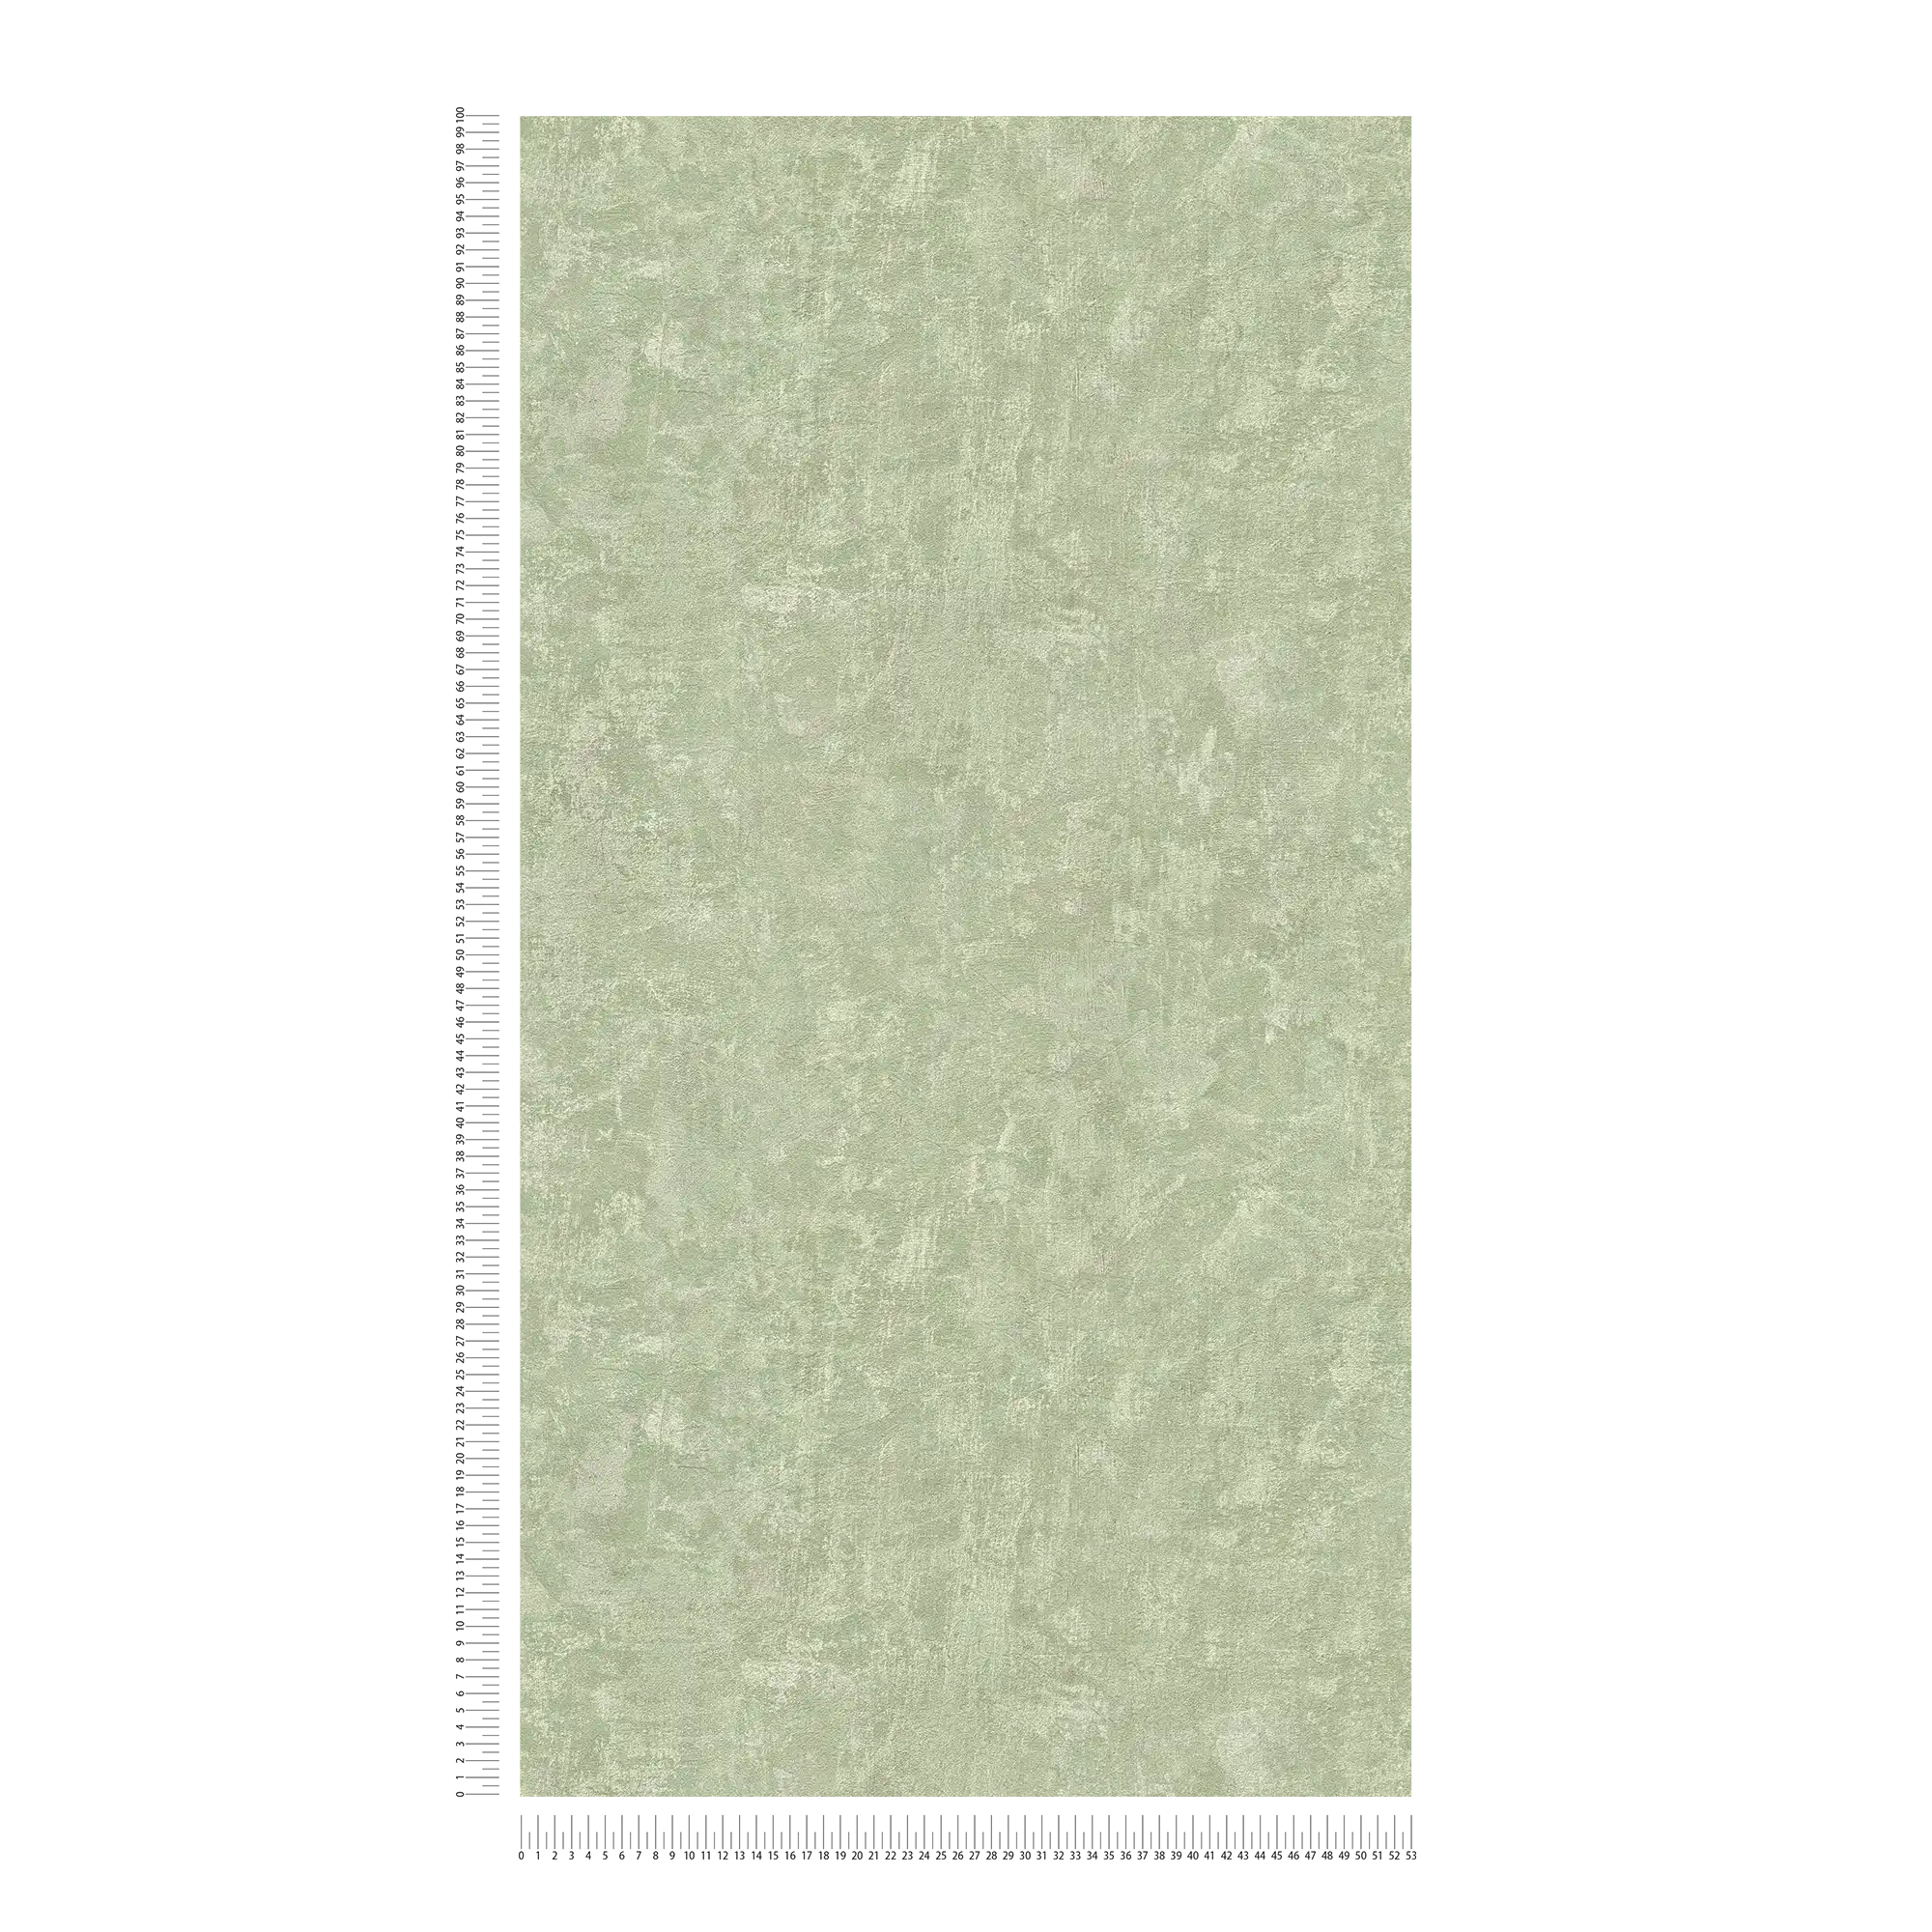             Non-woven wallpaper with textured pattern PVC-free - green
        